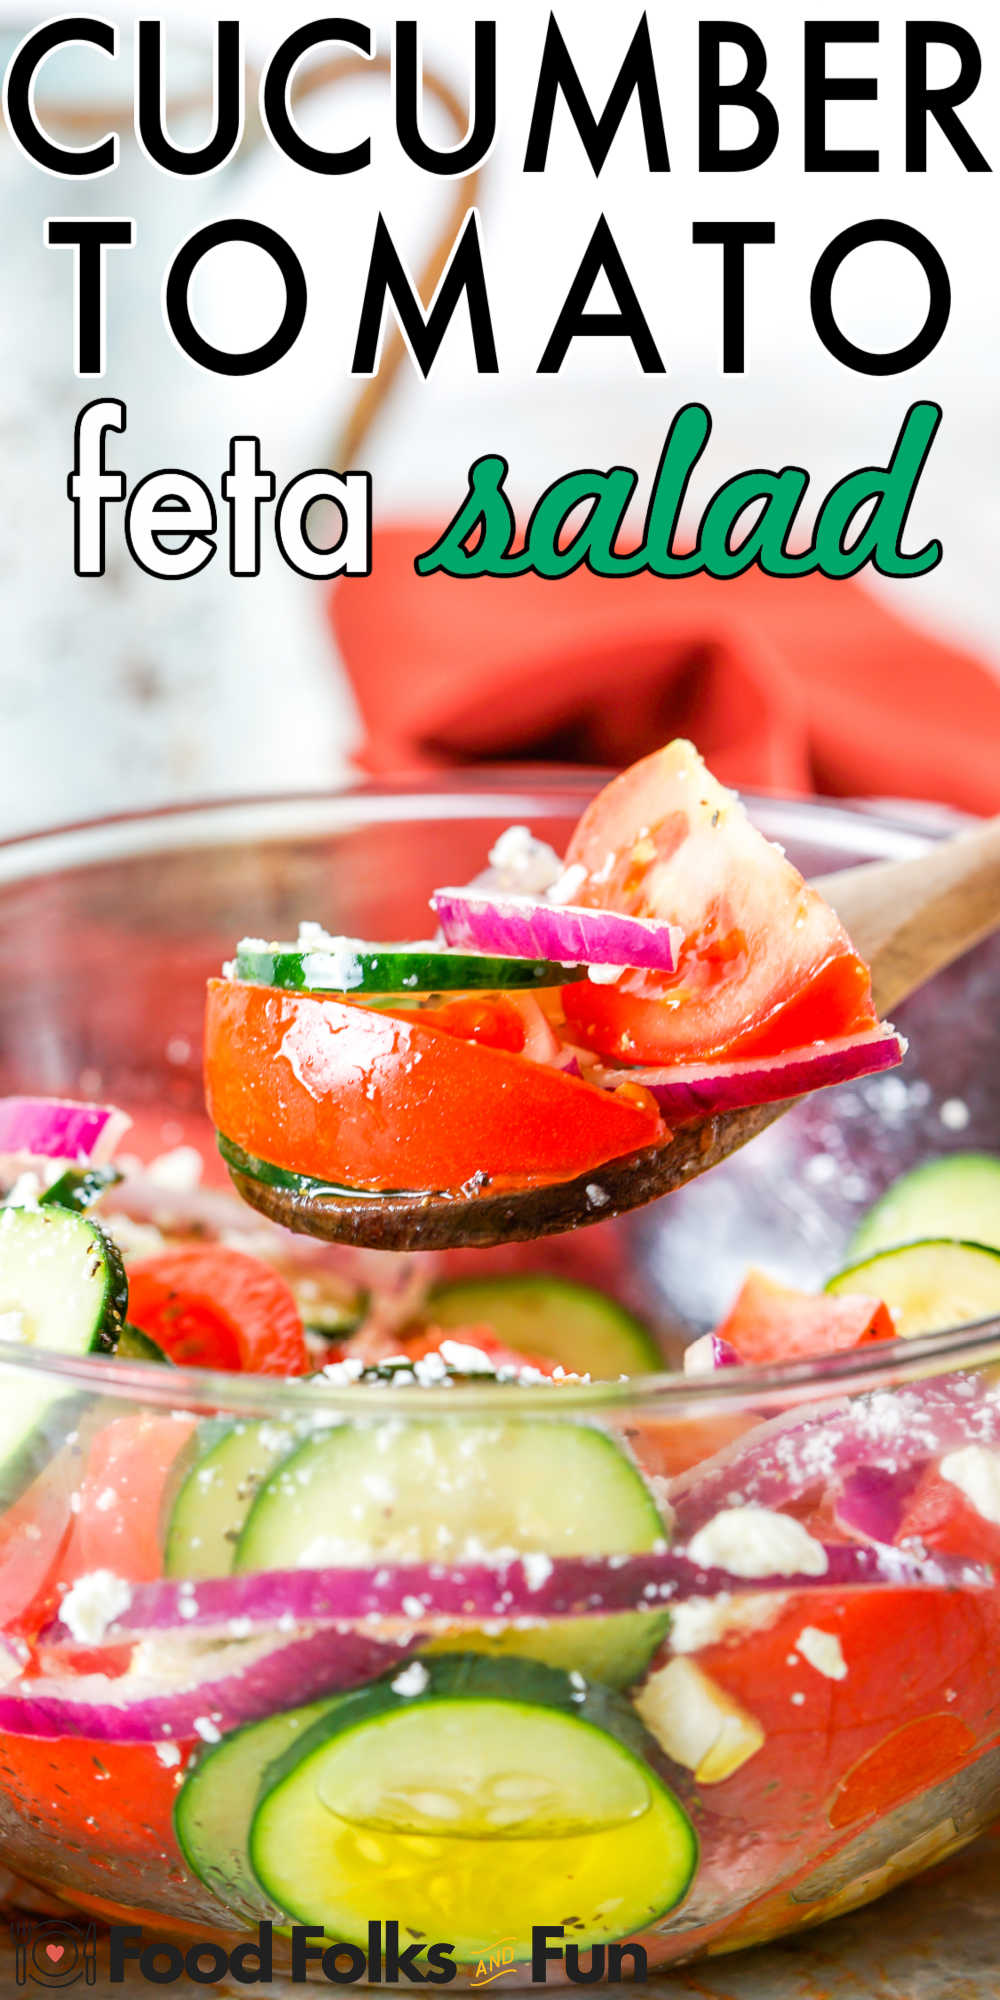 Cucumber Tomato Feta Salad is an easy and refreshing classic side dish for summer. It’s ready in less than 10 minutes. via @foodfolksandfun